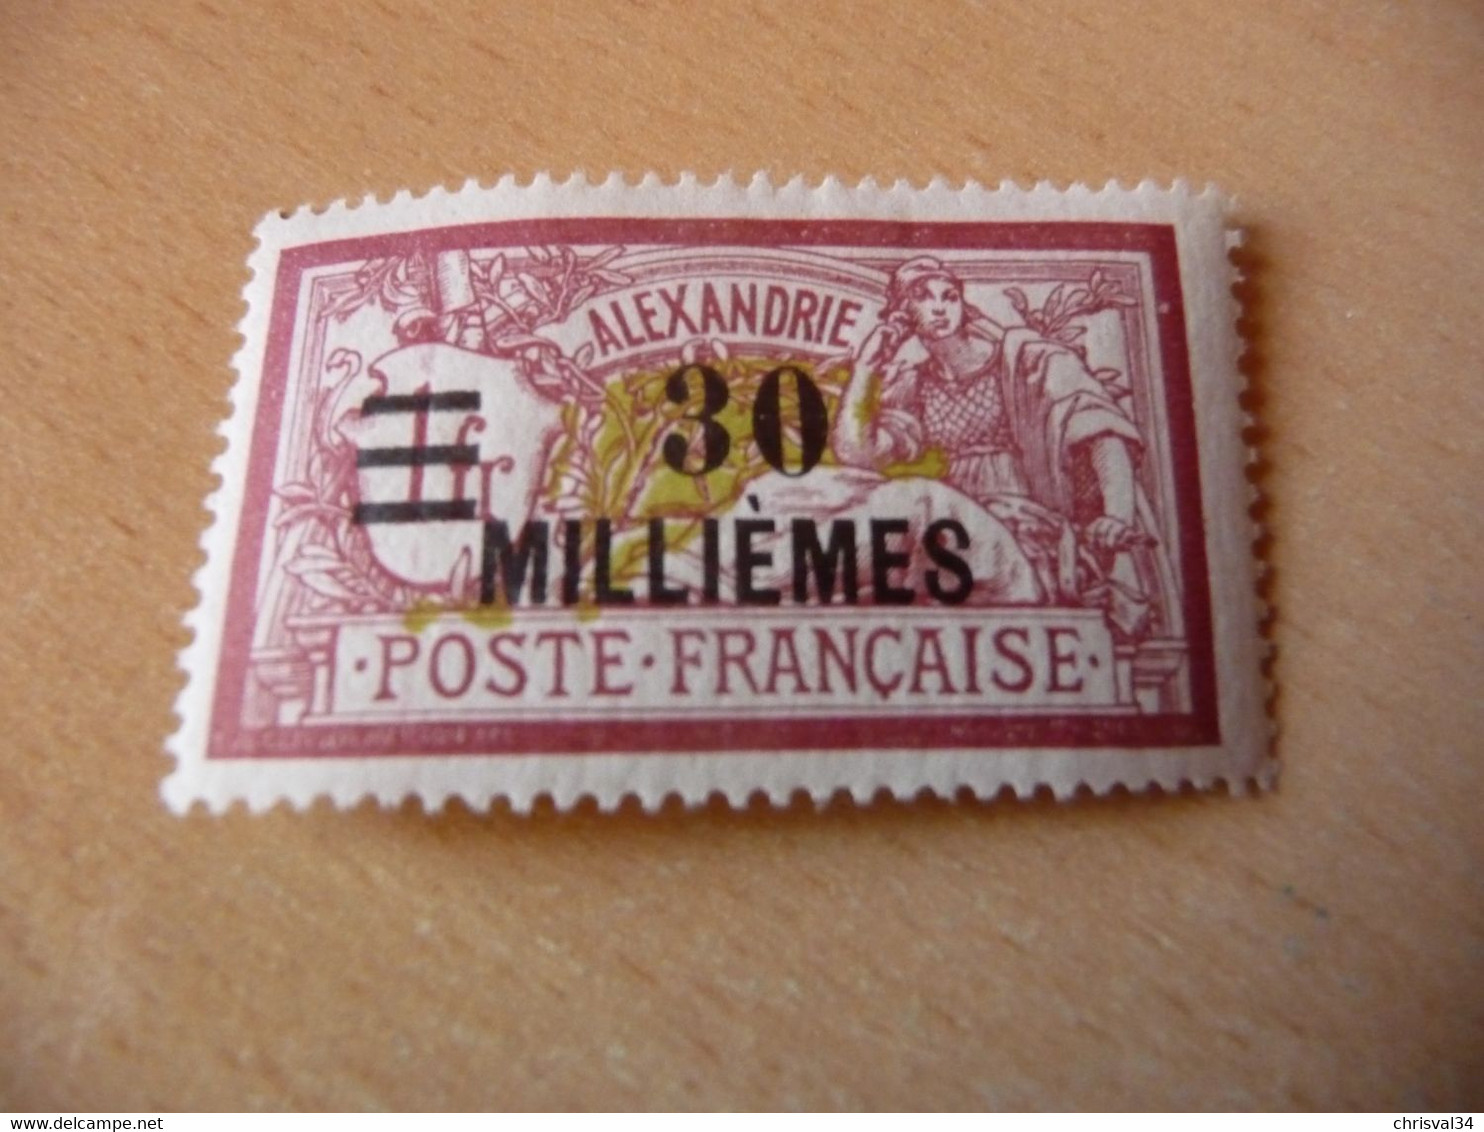 TIMBRE   ALEXANDRIE    N  72  COTE  5,00  EUROS    NEUF  TRACE  CHARNIERE - Neufs